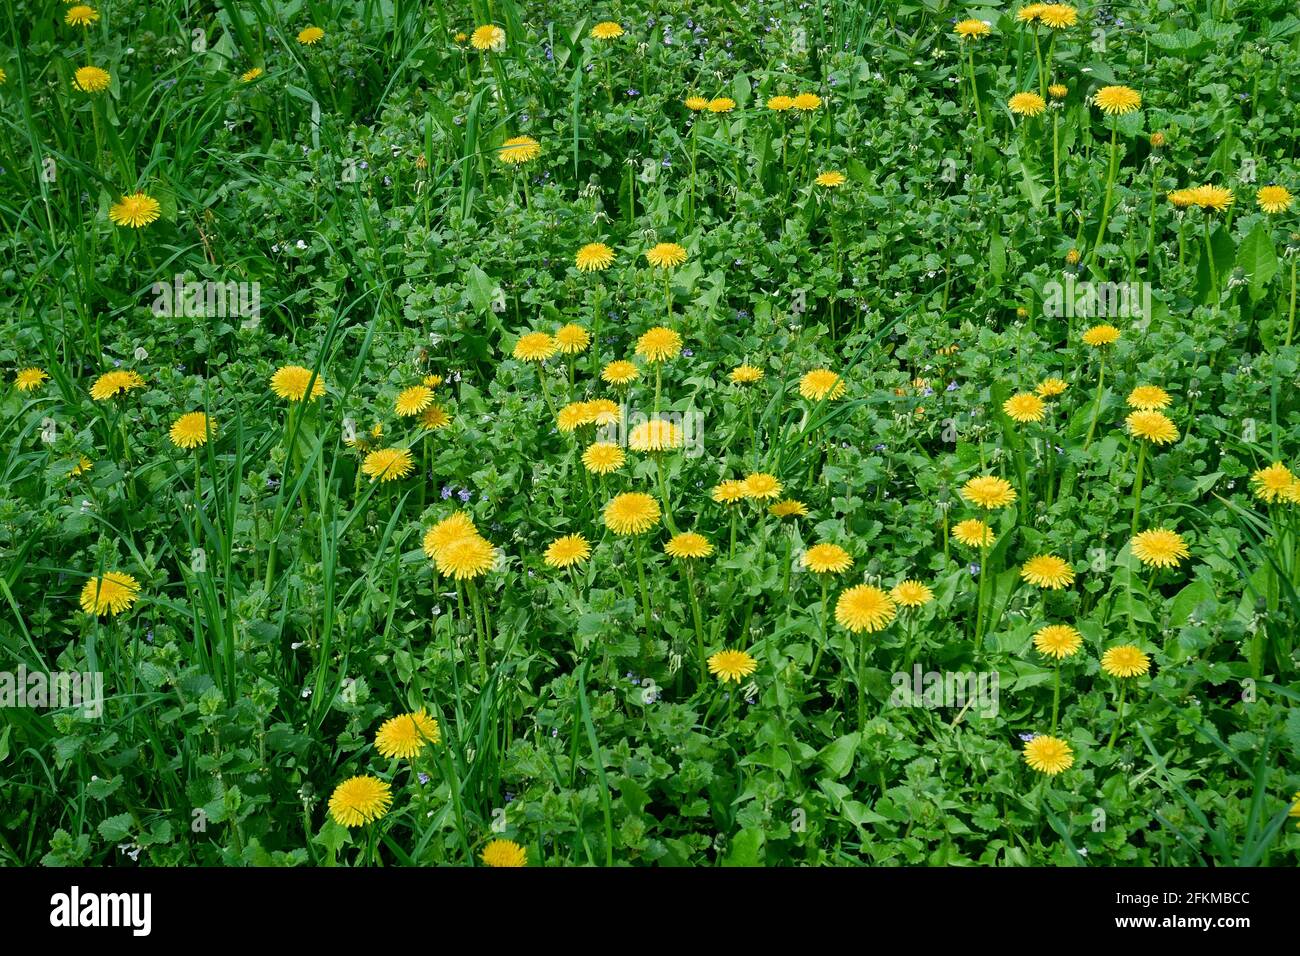 Flowering dandelion (in Latin: Taraxacum officinale) on meadow among various herbal plants in spring sunny day last April, close-up Stock Photo